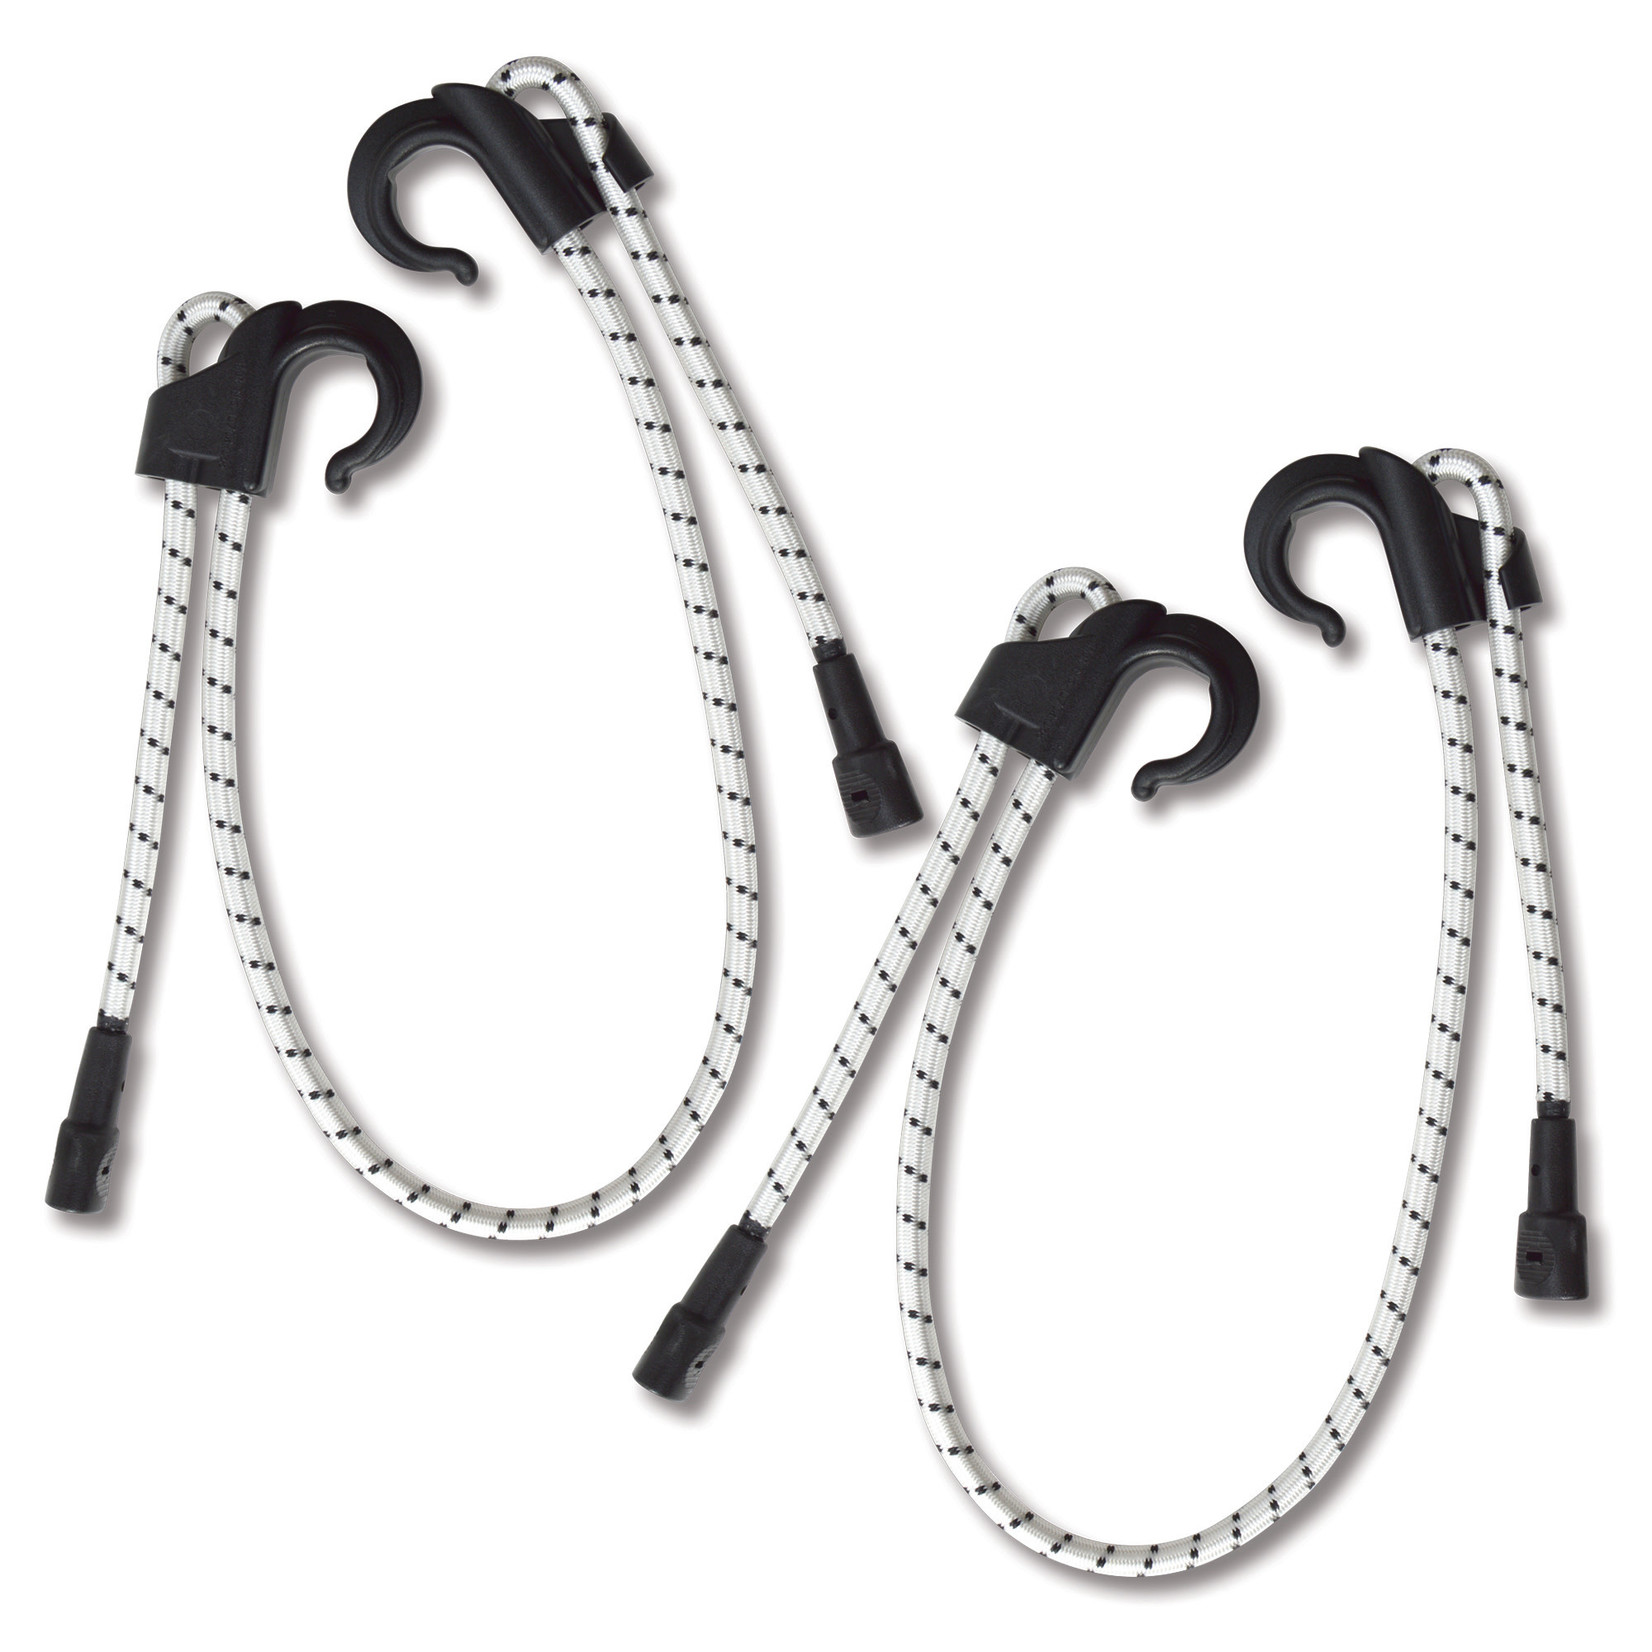 BUNGEE CORD MONKEY FINGERS DURA PLASTIC 6-60in ADJUSTABLE DOUBLE